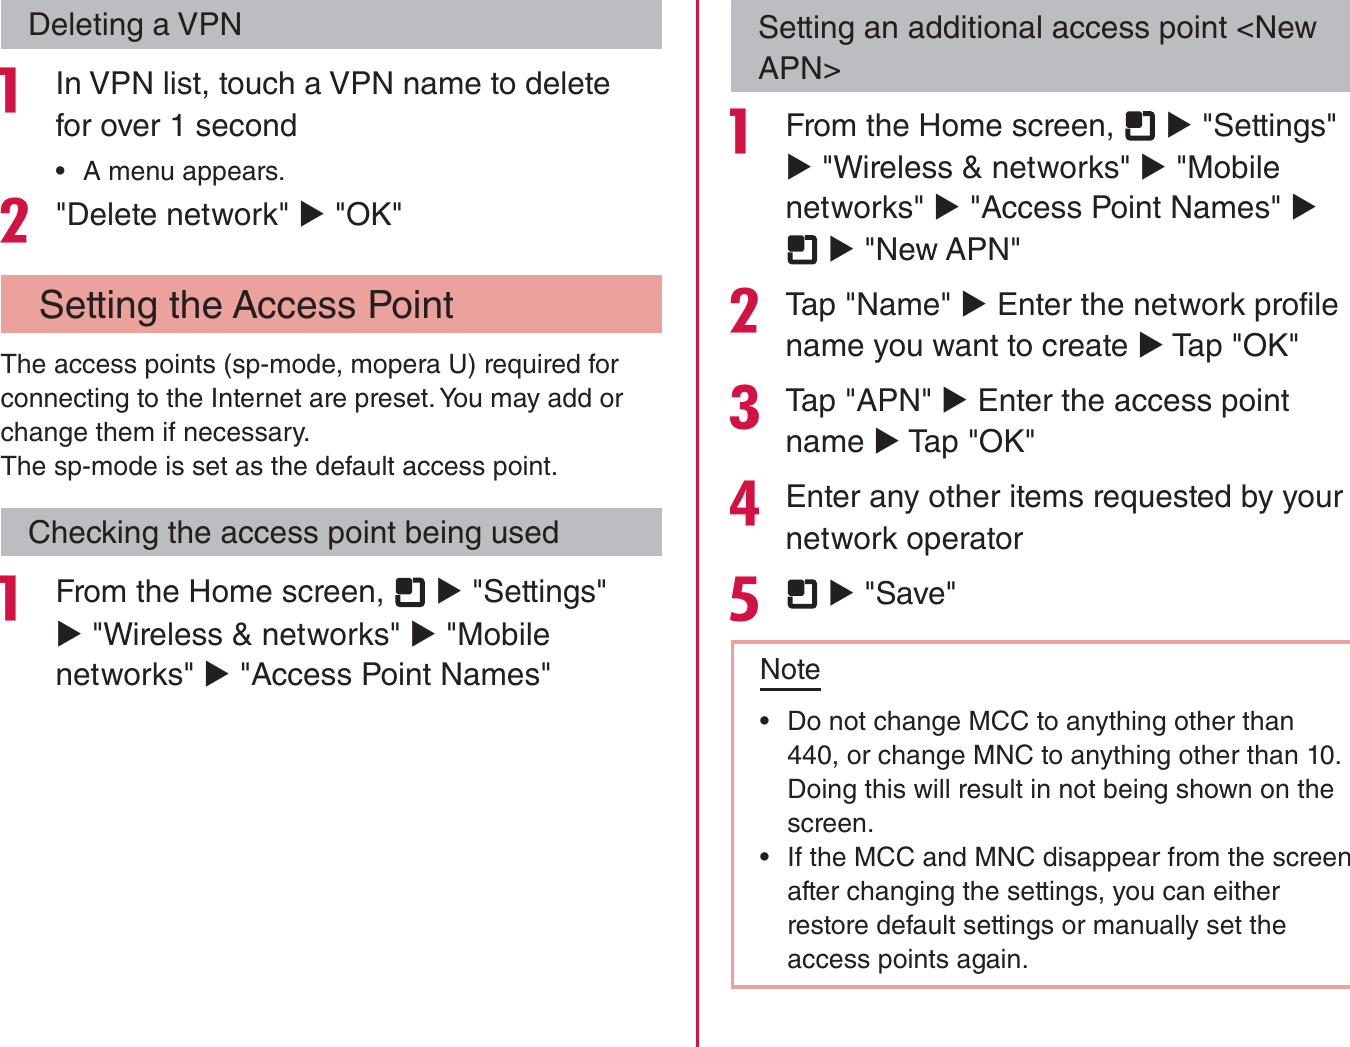 Deleting a VPN In VPN list, touch a VPN name to delete for over 1 second rA menu appears.&quot;Delete network&quot; X &quot;OK&quot; Setting the Access PointThe access points (sp-mode, mopera U) required for connecting to the Internet are preset. You may add or change them if necessary.The sp-mode is set as the default access point.Checking the access point being used From the Home screen,   X &quot;Settings&quot; X &quot;Wireless &amp; networks&quot; X &quot;Mobile networks&quot; X &quot;Access Point Names&quot;Setting an additional access point &lt;New APN&gt; From the Home screen,   X &quot;Settings&quot; X &quot;Wireless &amp; networks&quot; X &quot;Mobile networks&quot; X &quot;Access Point Names&quot; X  X &quot;New APN&quot;Tap &quot;Name&quot; X Enter the network profile name you want to create X Tap &quot;OK&quot;Tap &quot;APN&quot; X Enter the access point name X Tap &quot;OK&quot;Enter any other items requested by your network operator  X &quot;Save&quot;Note rDo not change MCC to anything other than 440, or change MNC to anything other than 10. Doing this will result in not being shown on the screen. rIf the MCC and MNC disappear from the screen after changing the settings, you can either restore default settings or manually set the access points again.104Settings